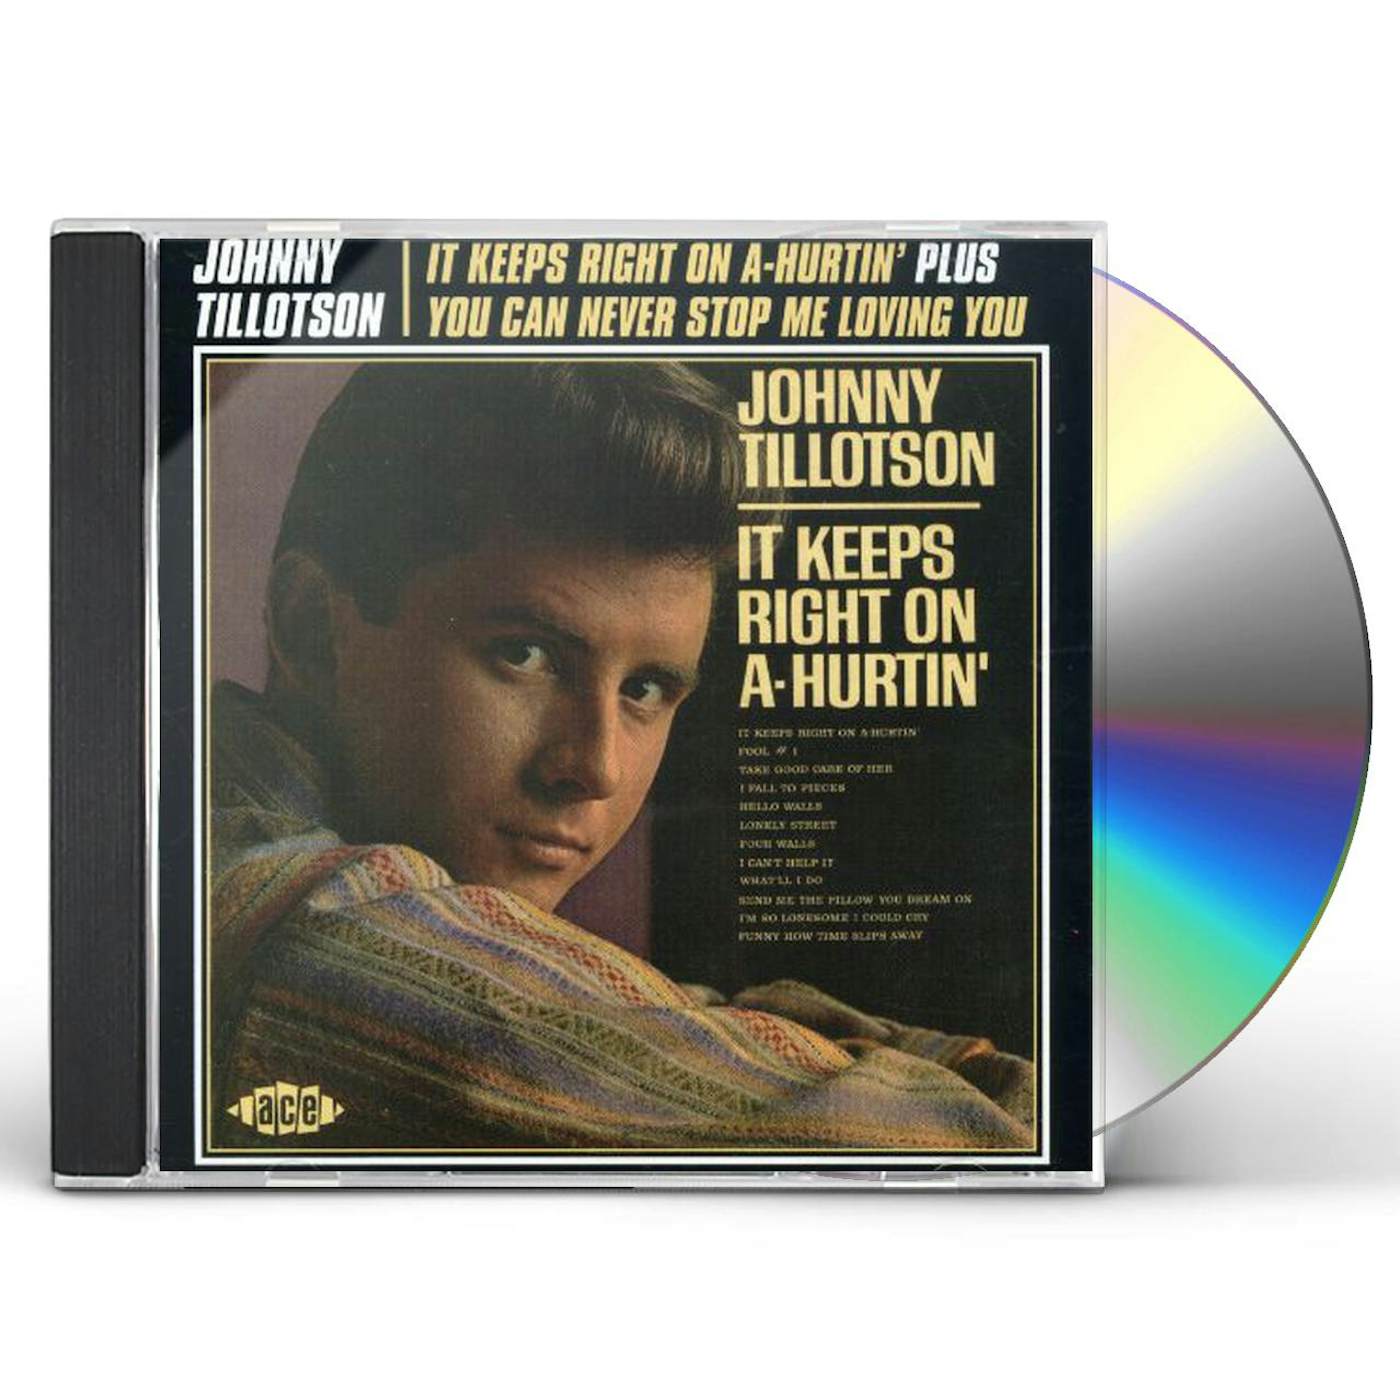 Johnny Tillotson IT KEEPS RIGHT ON-HURTIN / YOU CAN NEVER STOP ME CD